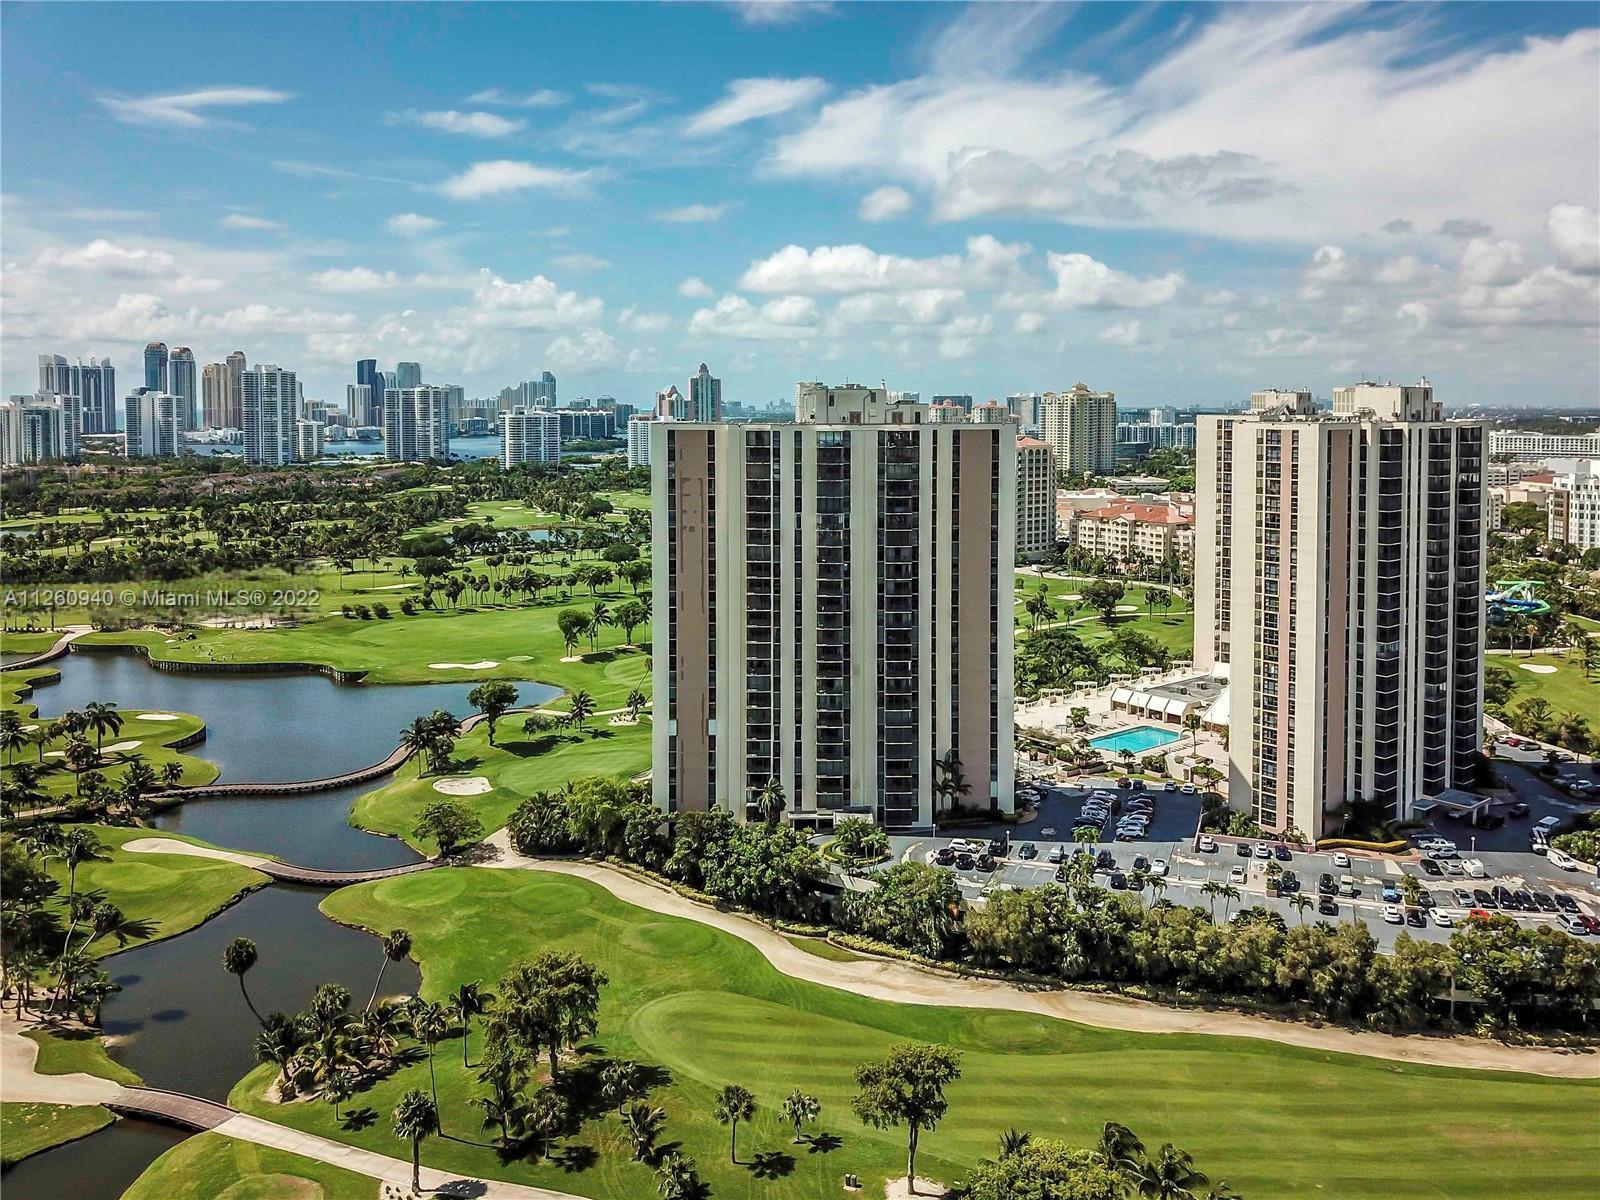 2 bedrooms, 2 bathrooms in the heart of Aventura, located on Country Club Drive. This unit has beaut